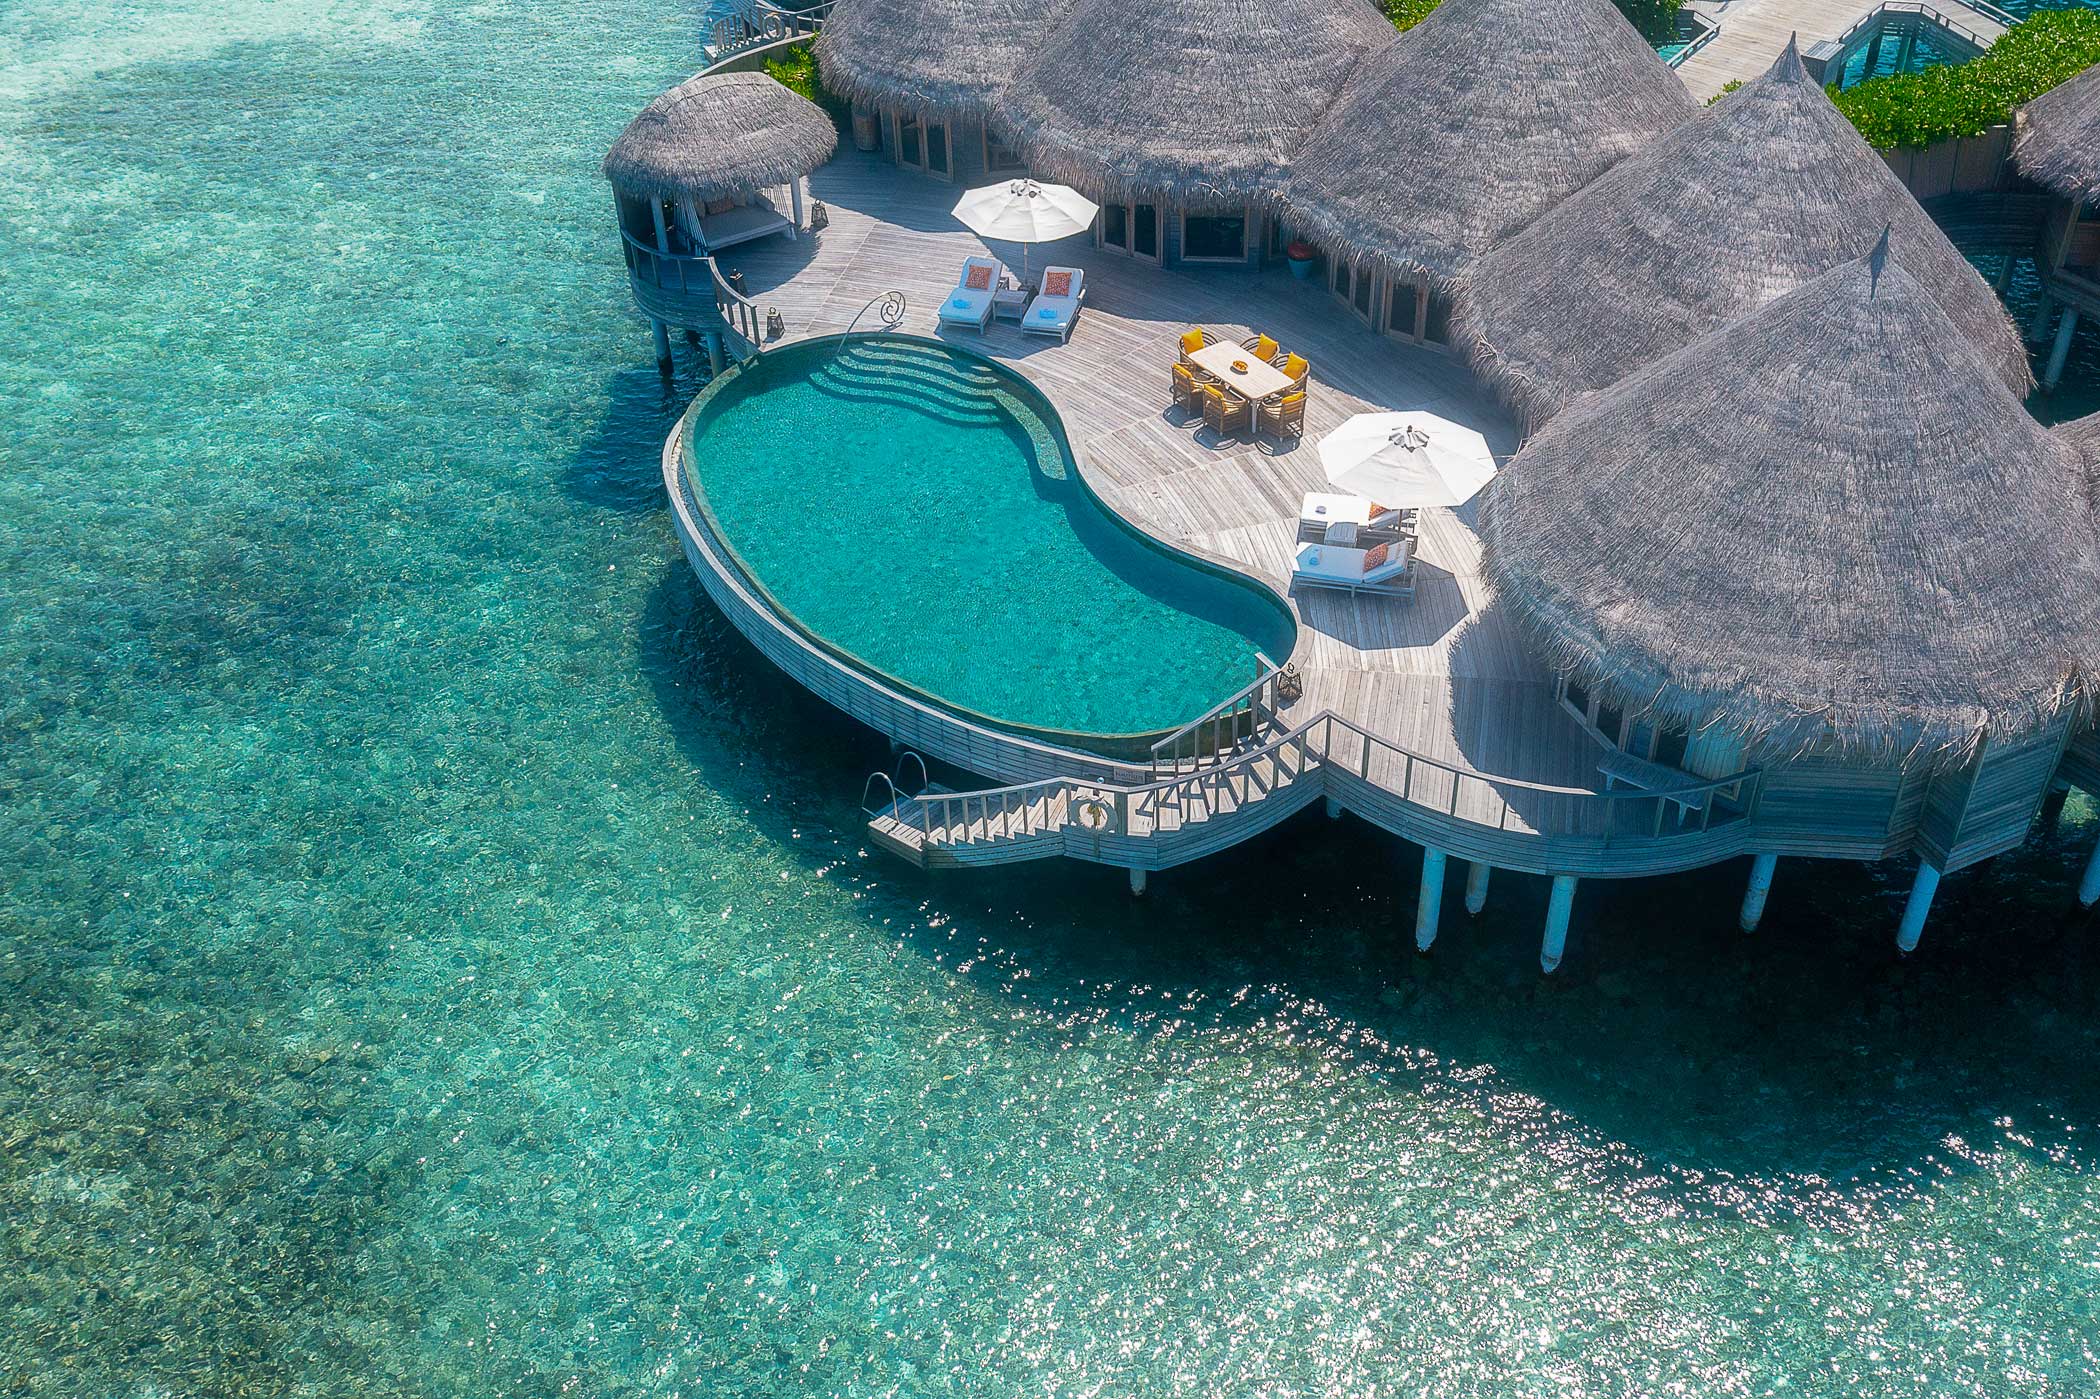 The Nautilus retreat with private pool